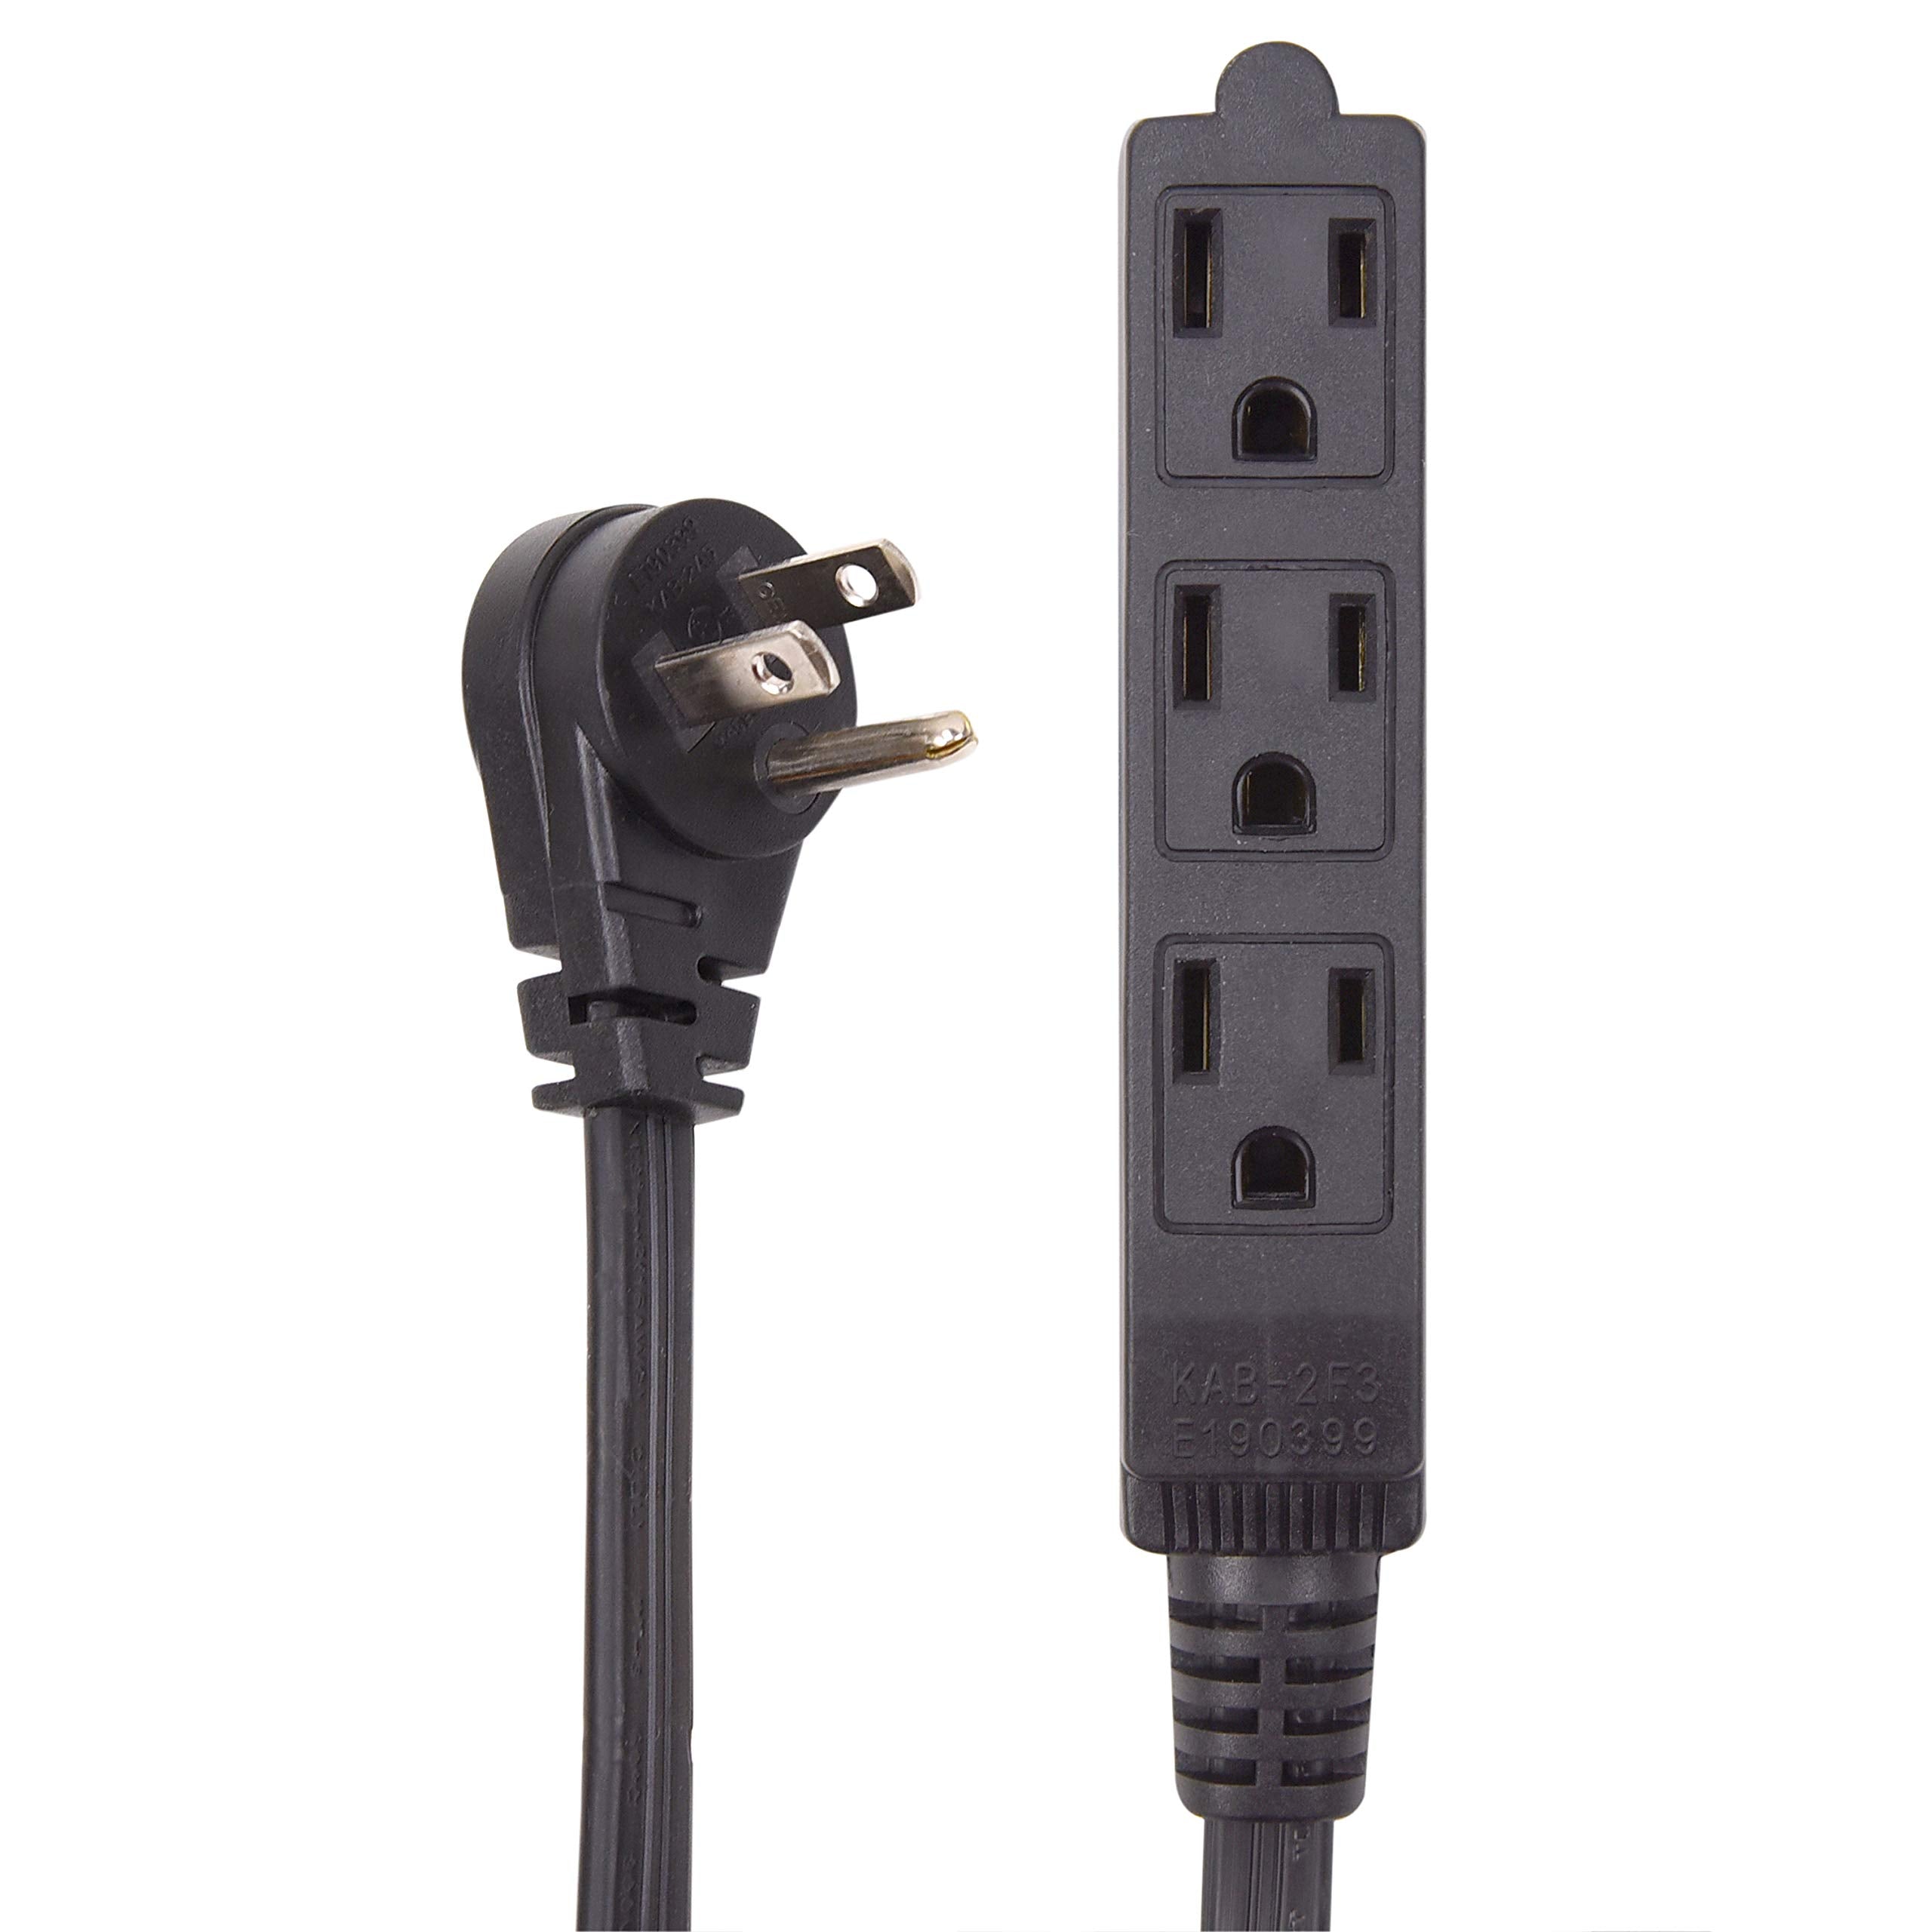 Flat Multiple Outlet Extension Cord for Indoor Use by Electes- UL-Listed 3-Prong Multi Extension Wire- Space-Saving Flat Angled Extension Cord- Black  - Acceptable